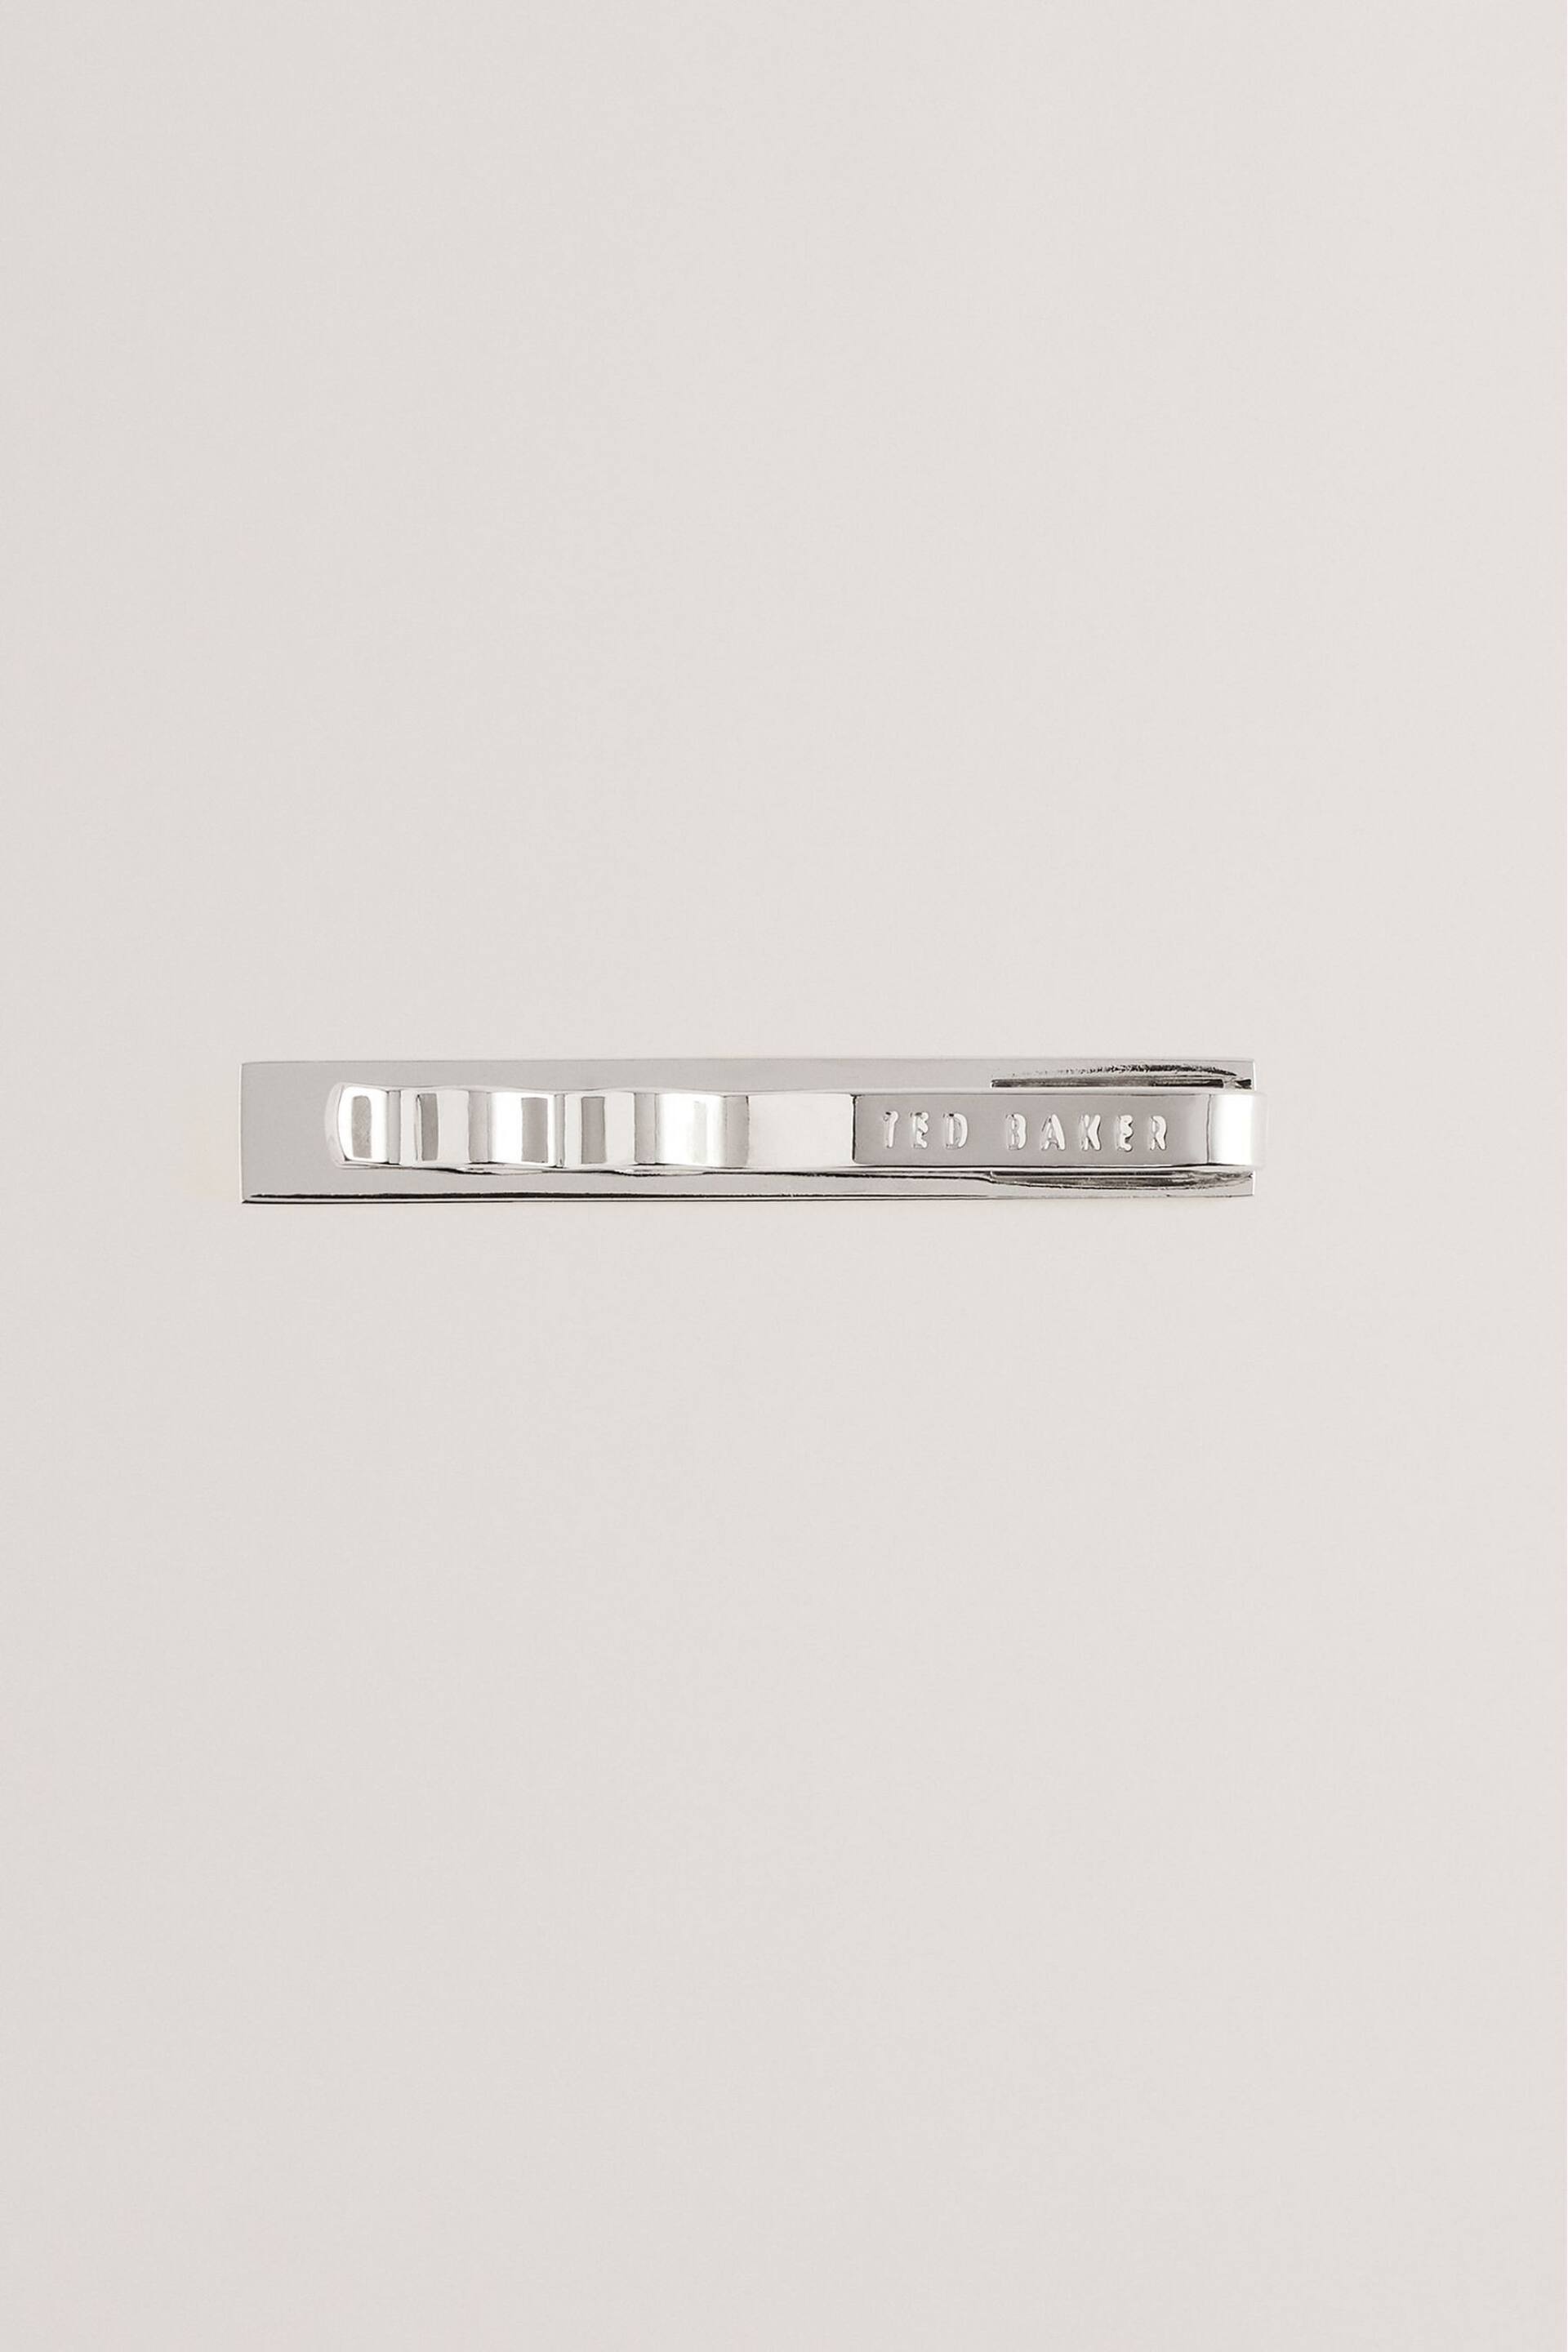 Ted Baker Giovi Silver Crystal Stone Tie Bar - Image 3 of 3